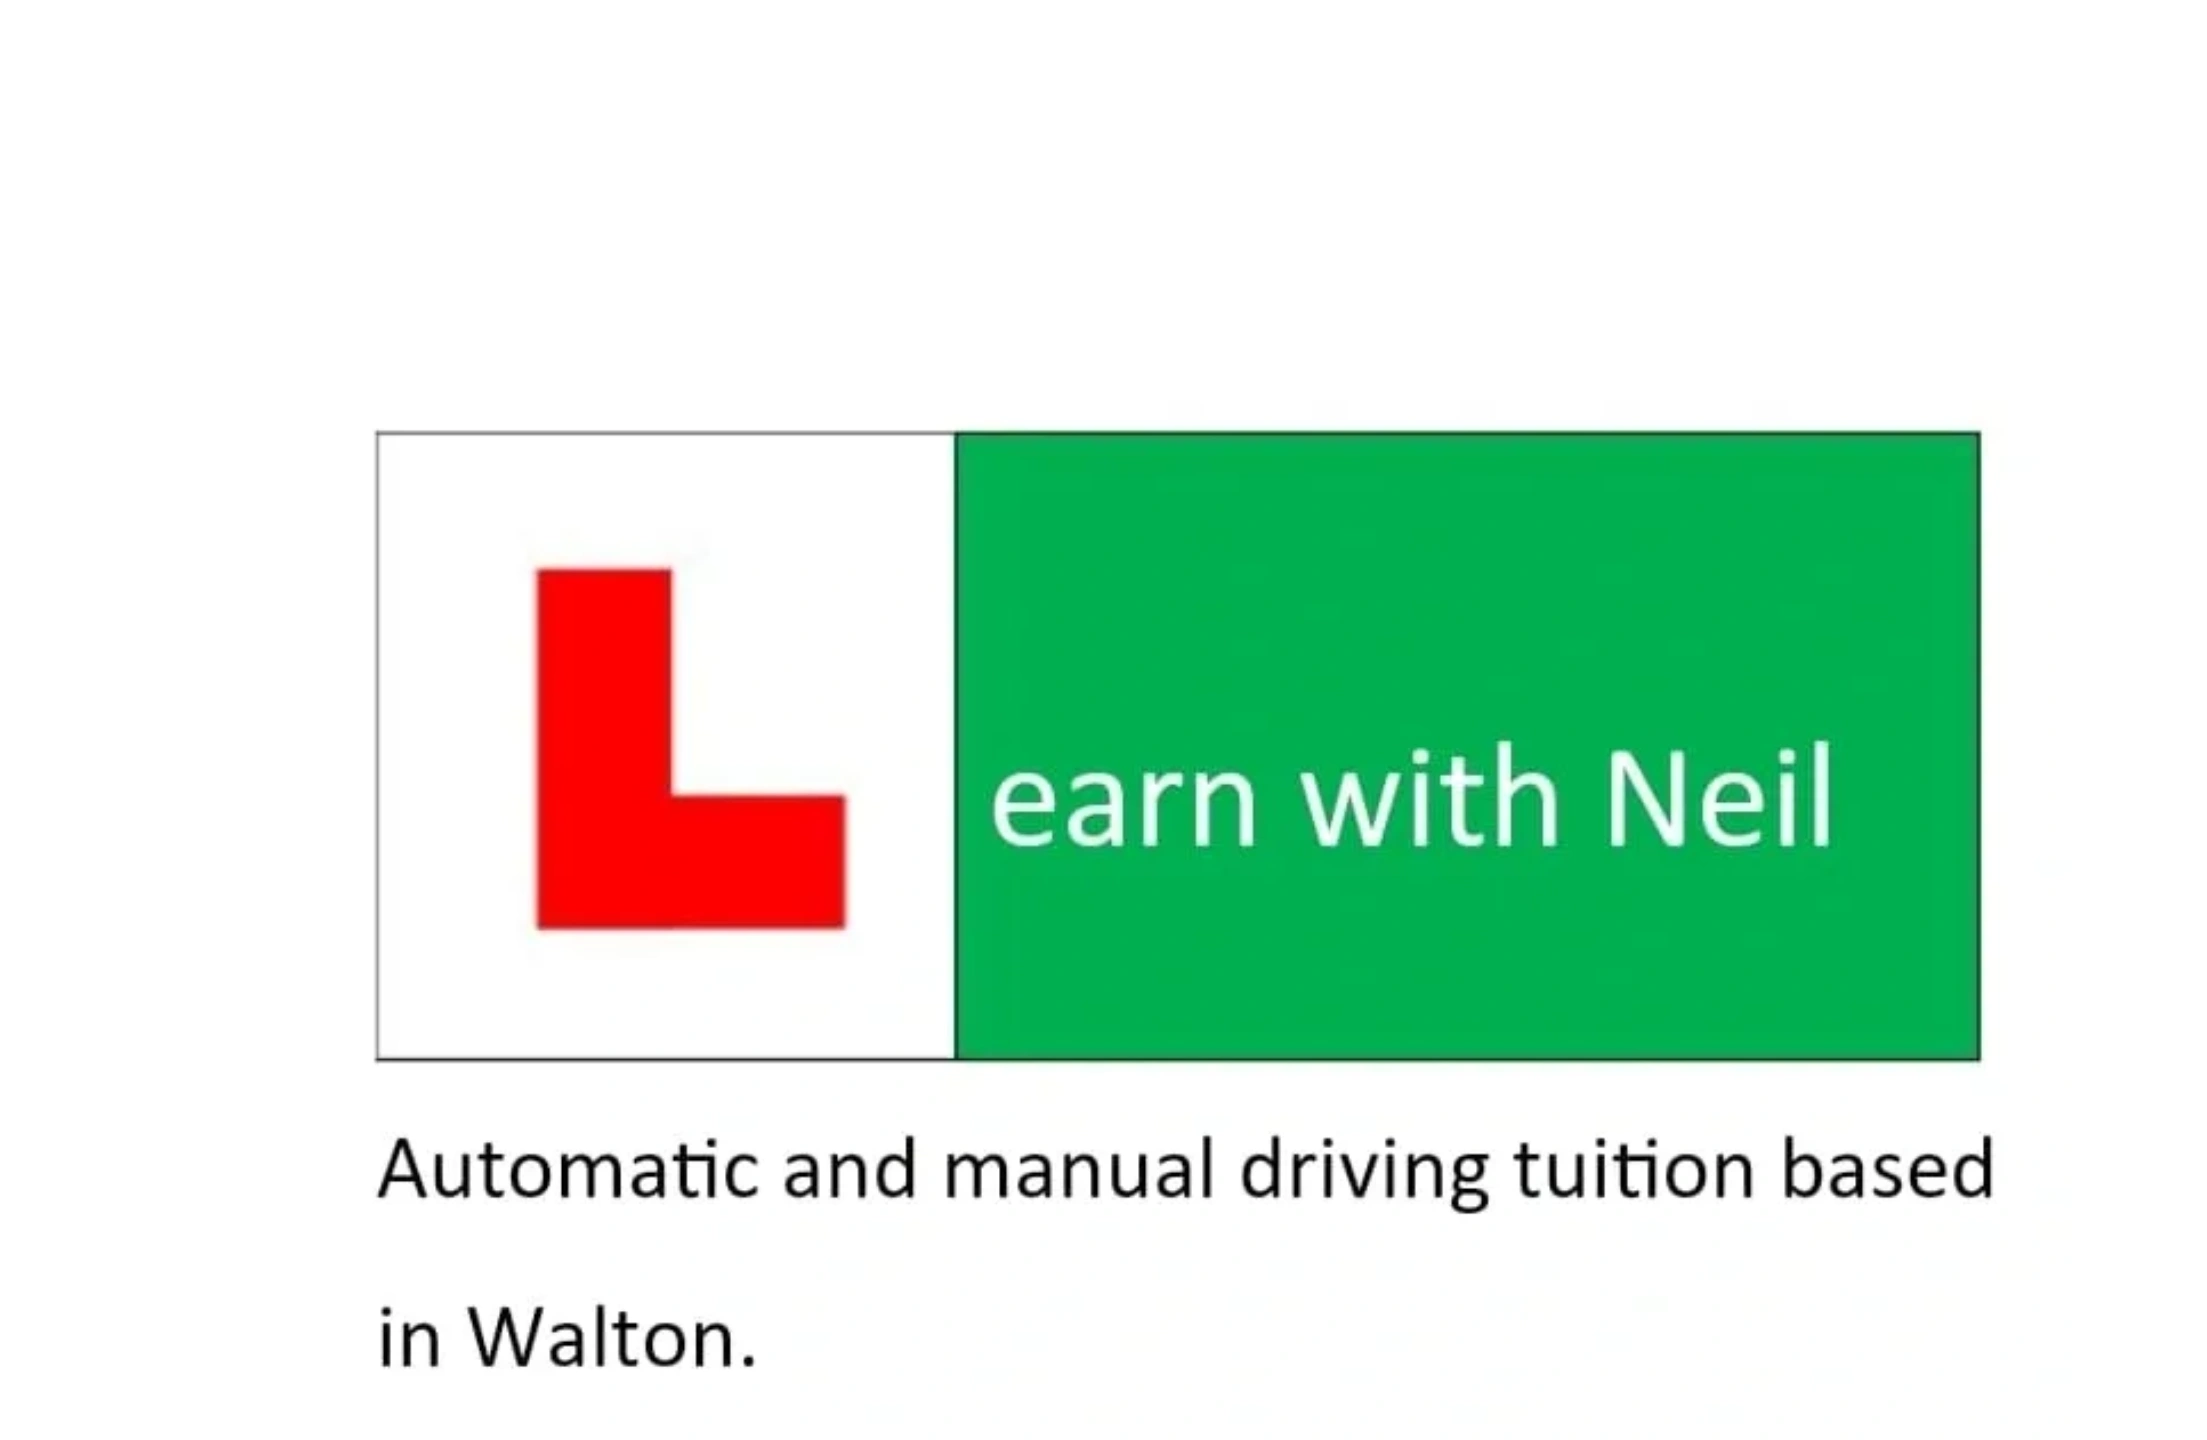 (c) Learnwithneil.co.uk